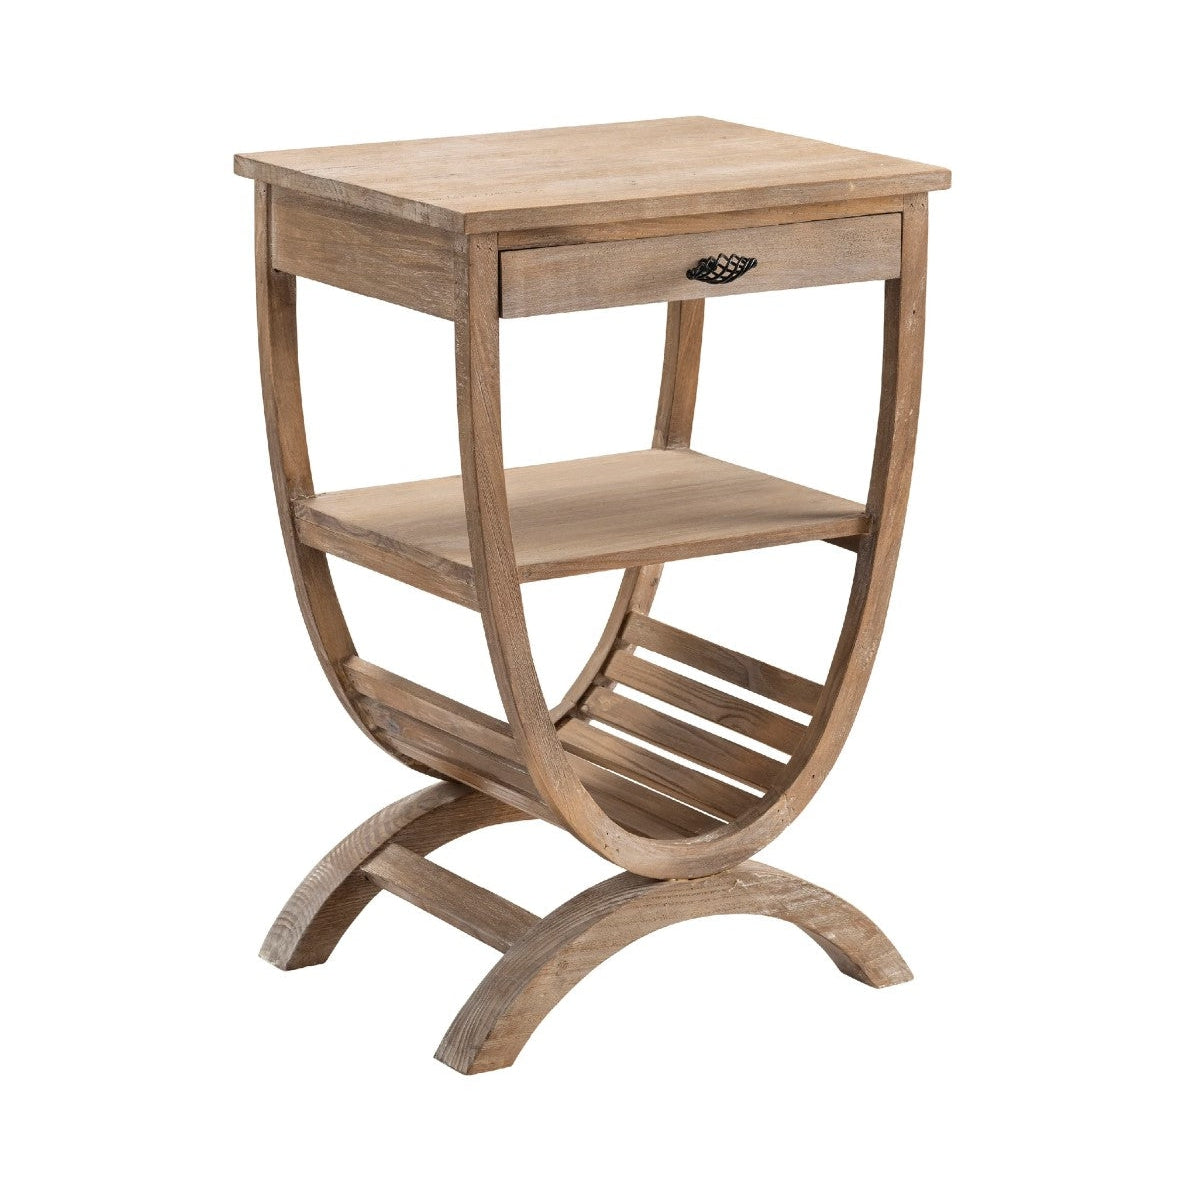 Crestview Collection Blondelle 20" x 16" x 30" Rustic Wood Accent Table In Blond Wood Finish